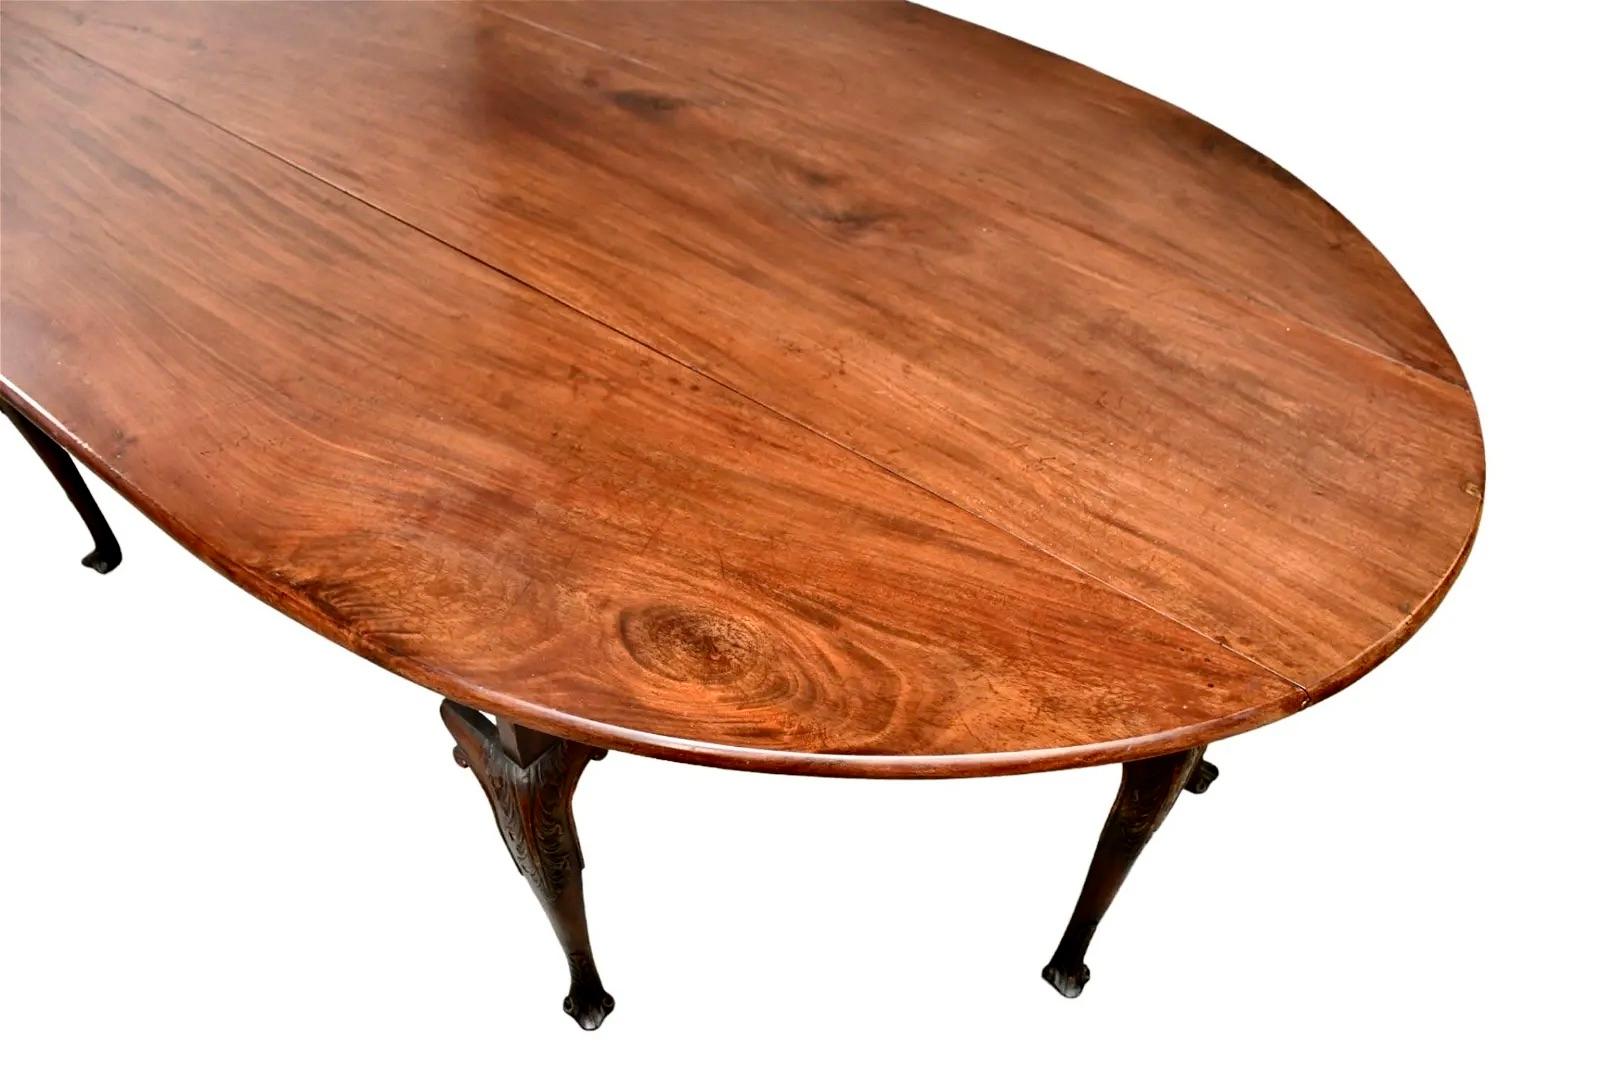 Carved 18th Century Irish Mahogany Wake or Dropleaf Dining Table For Sale